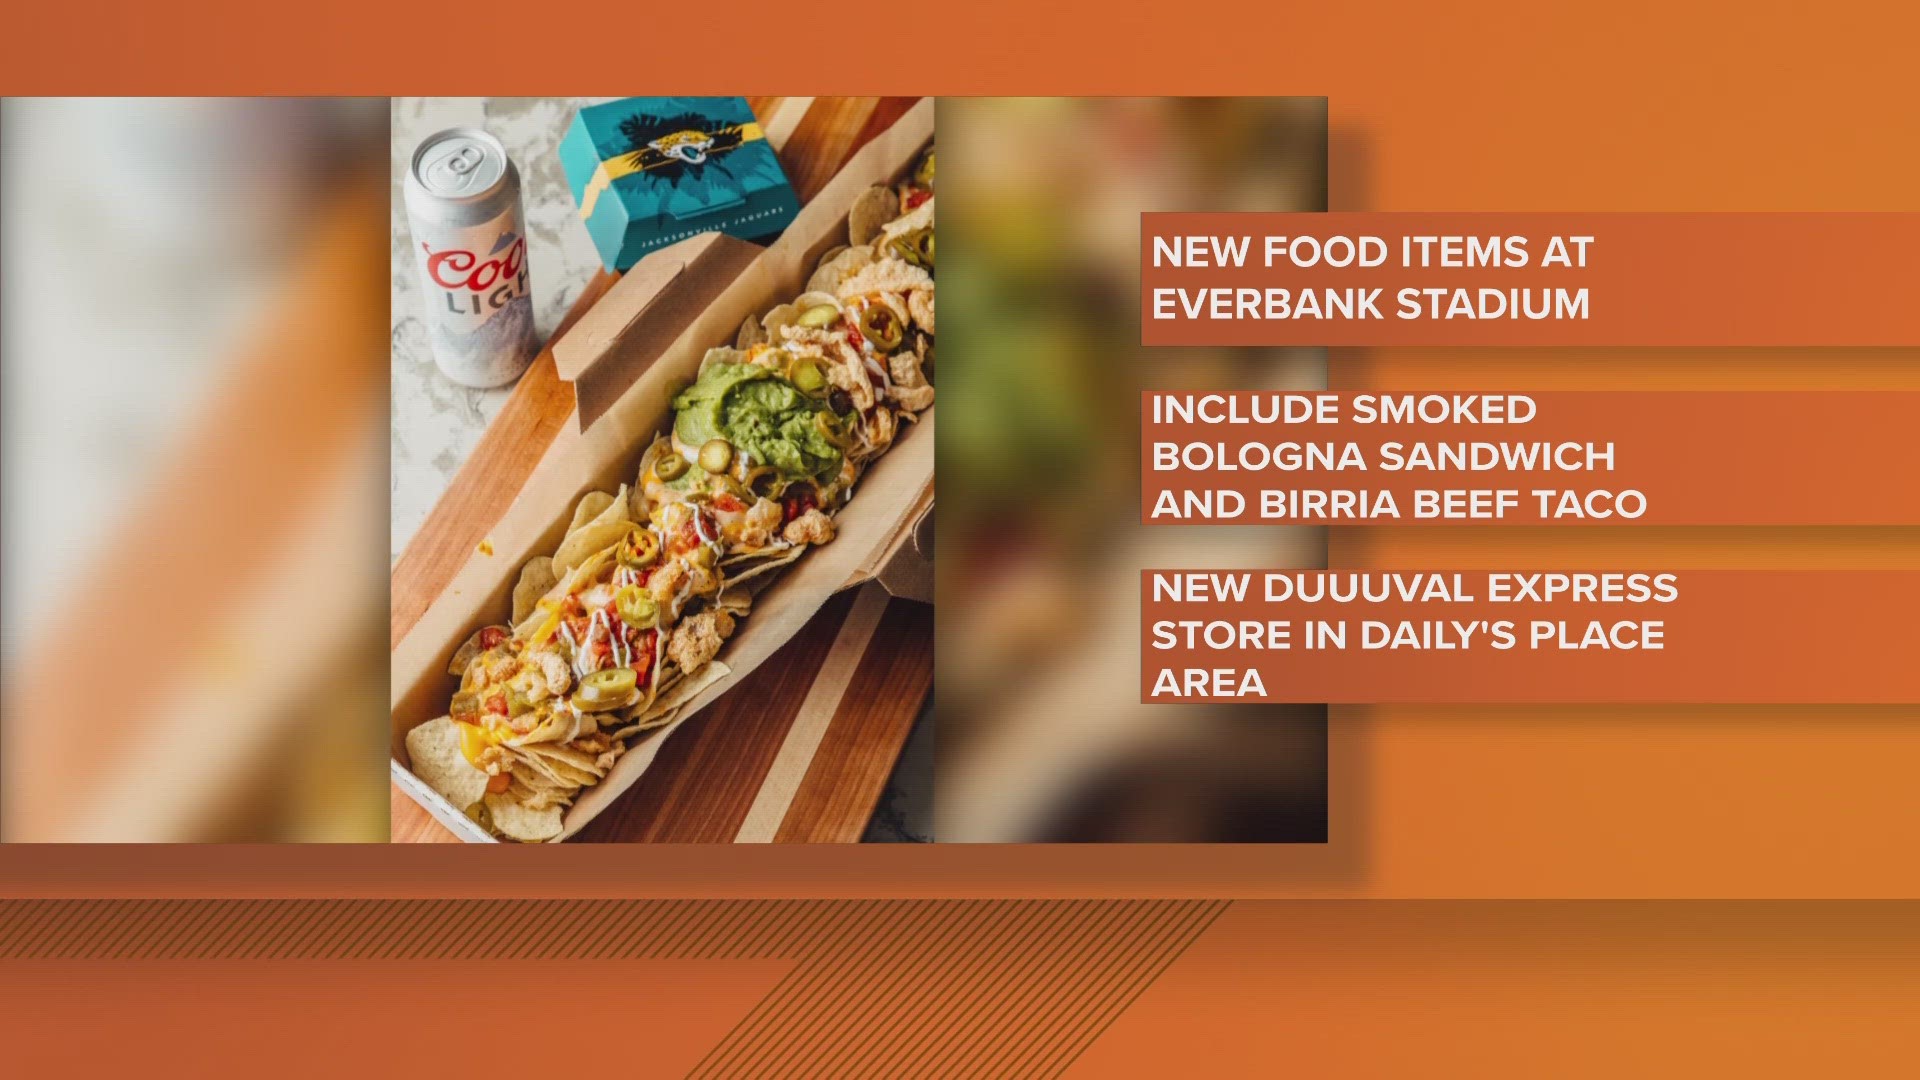 A day before the Jaguars' home opening game, EverBank Stadium has revealed that there will be new food items available on menus, including a smoked bologna sandwich.